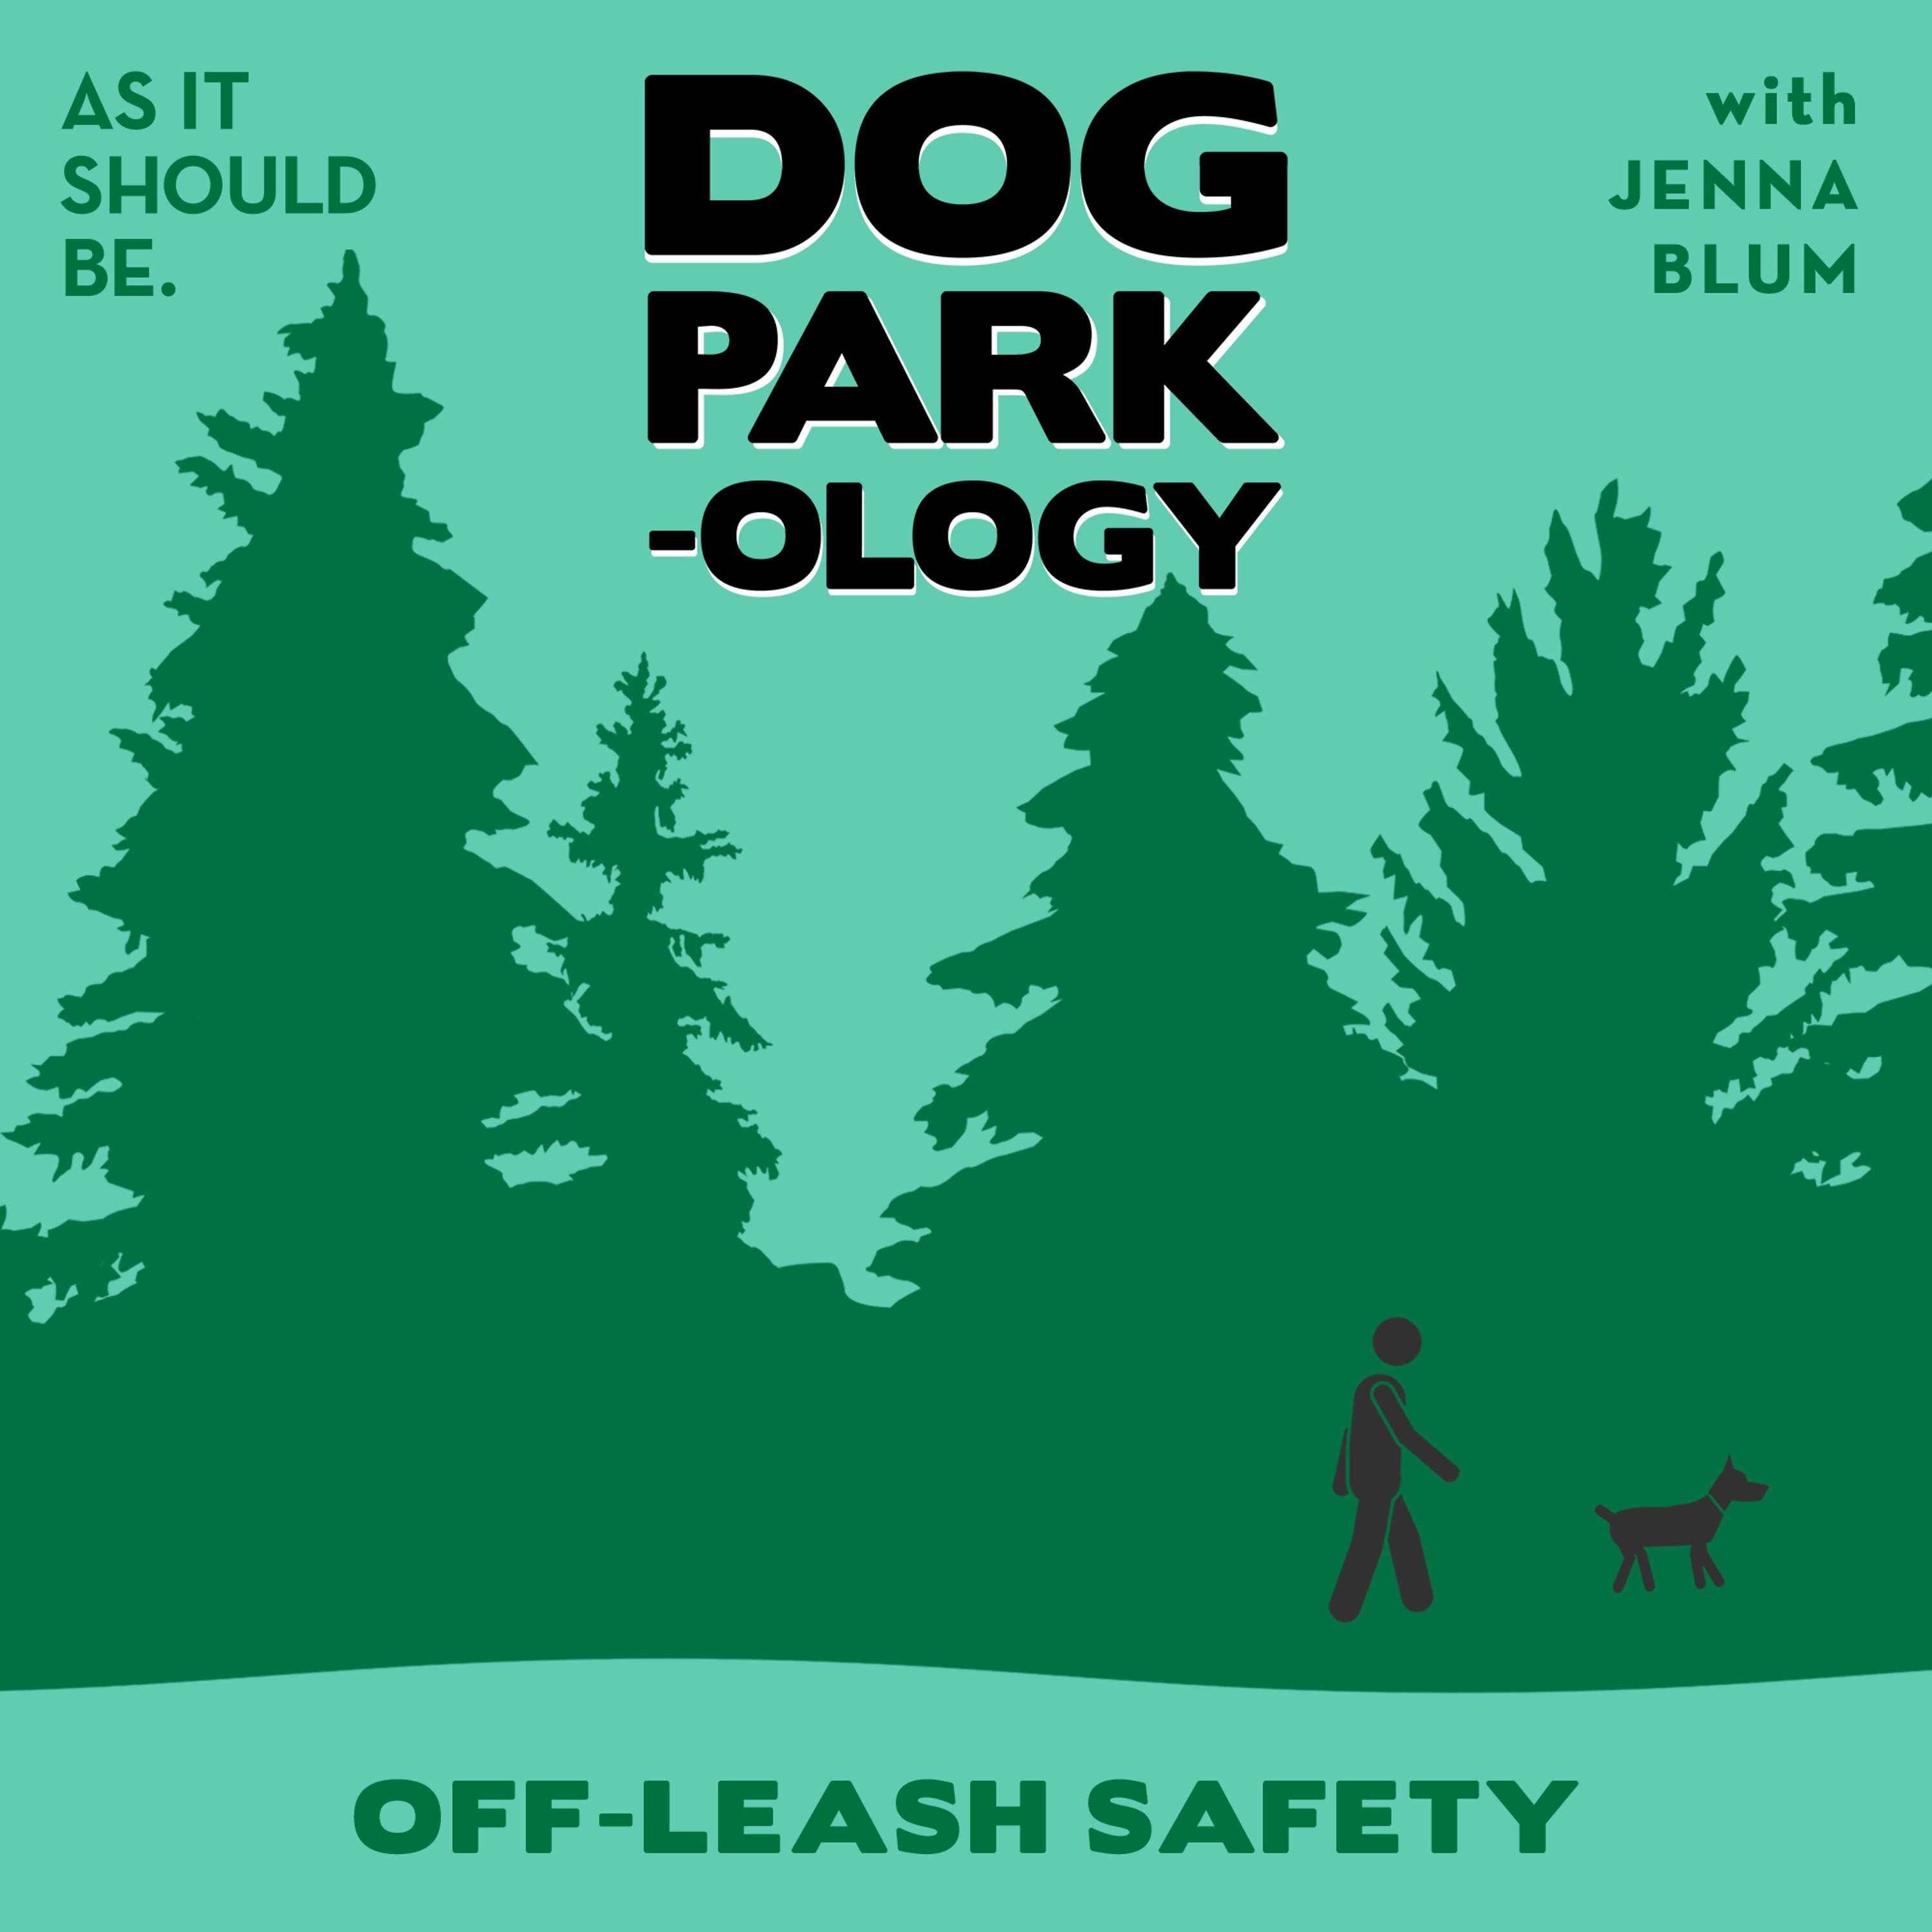 Bonus: How To Safely Allow Your Dog Off-Leash